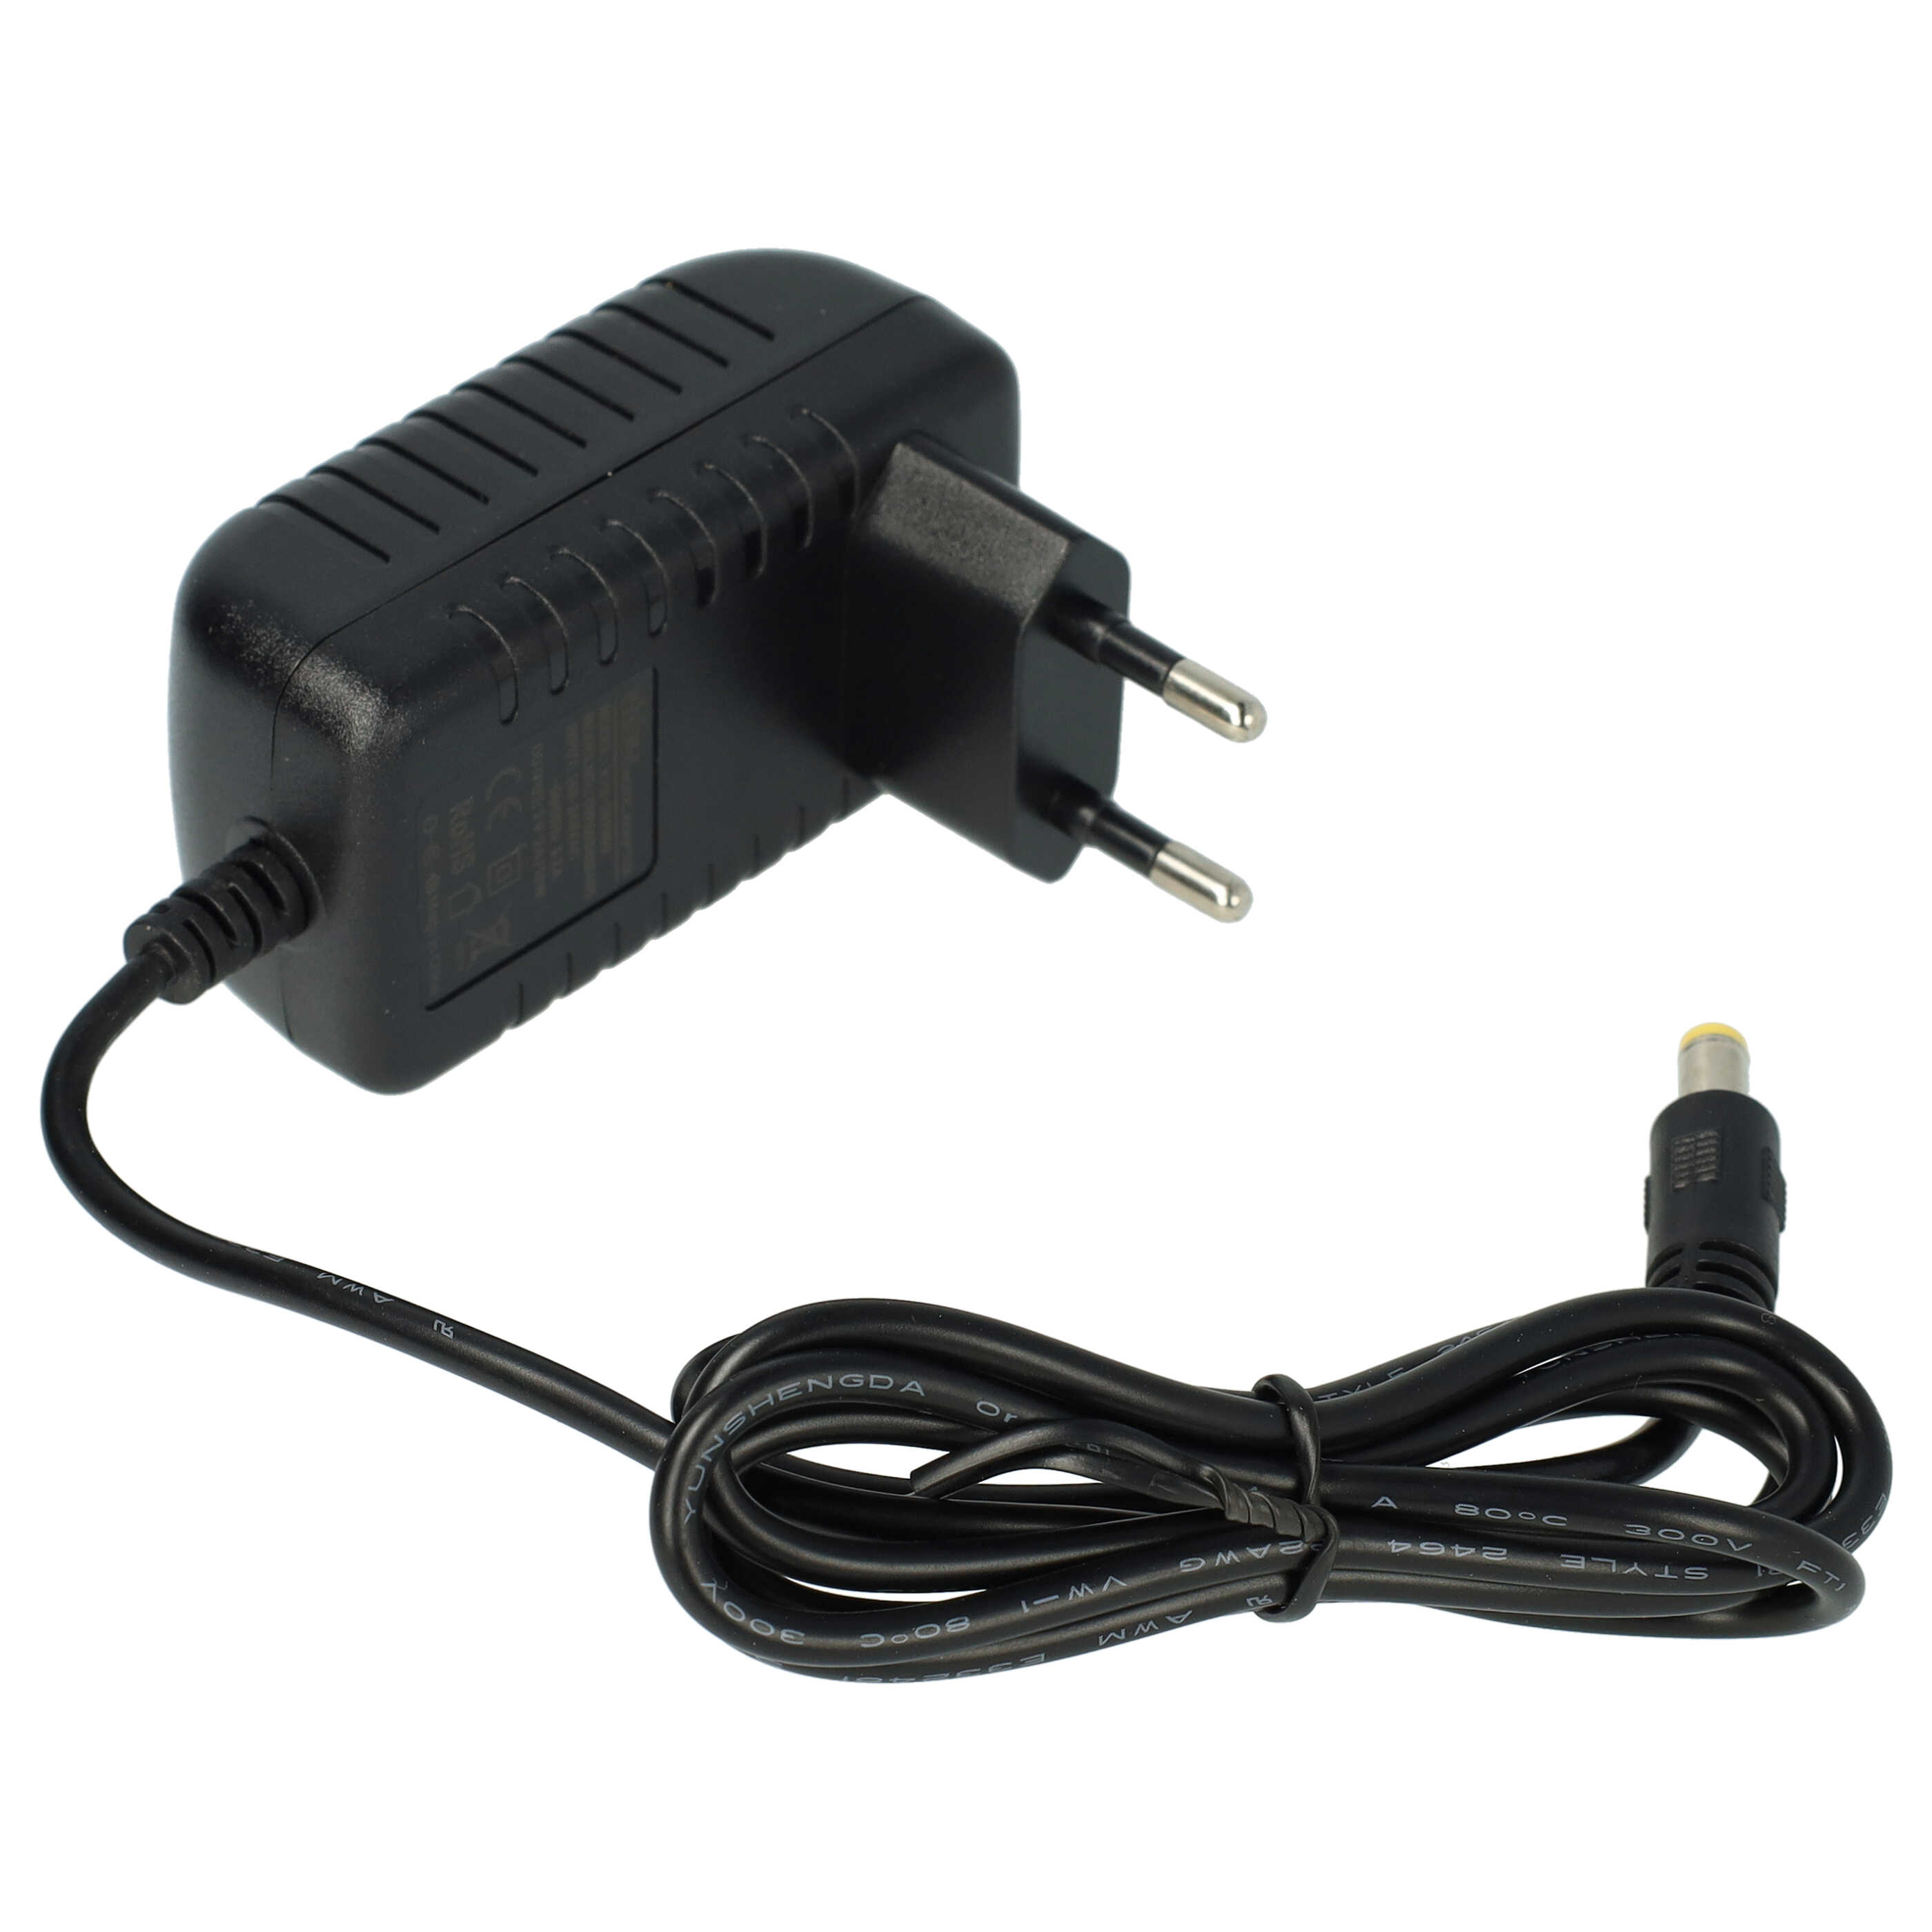 Mains Power Adapter with 5.5 x 2.1 mm Plug suitable for various Electric Devices - 5 V / 2 A